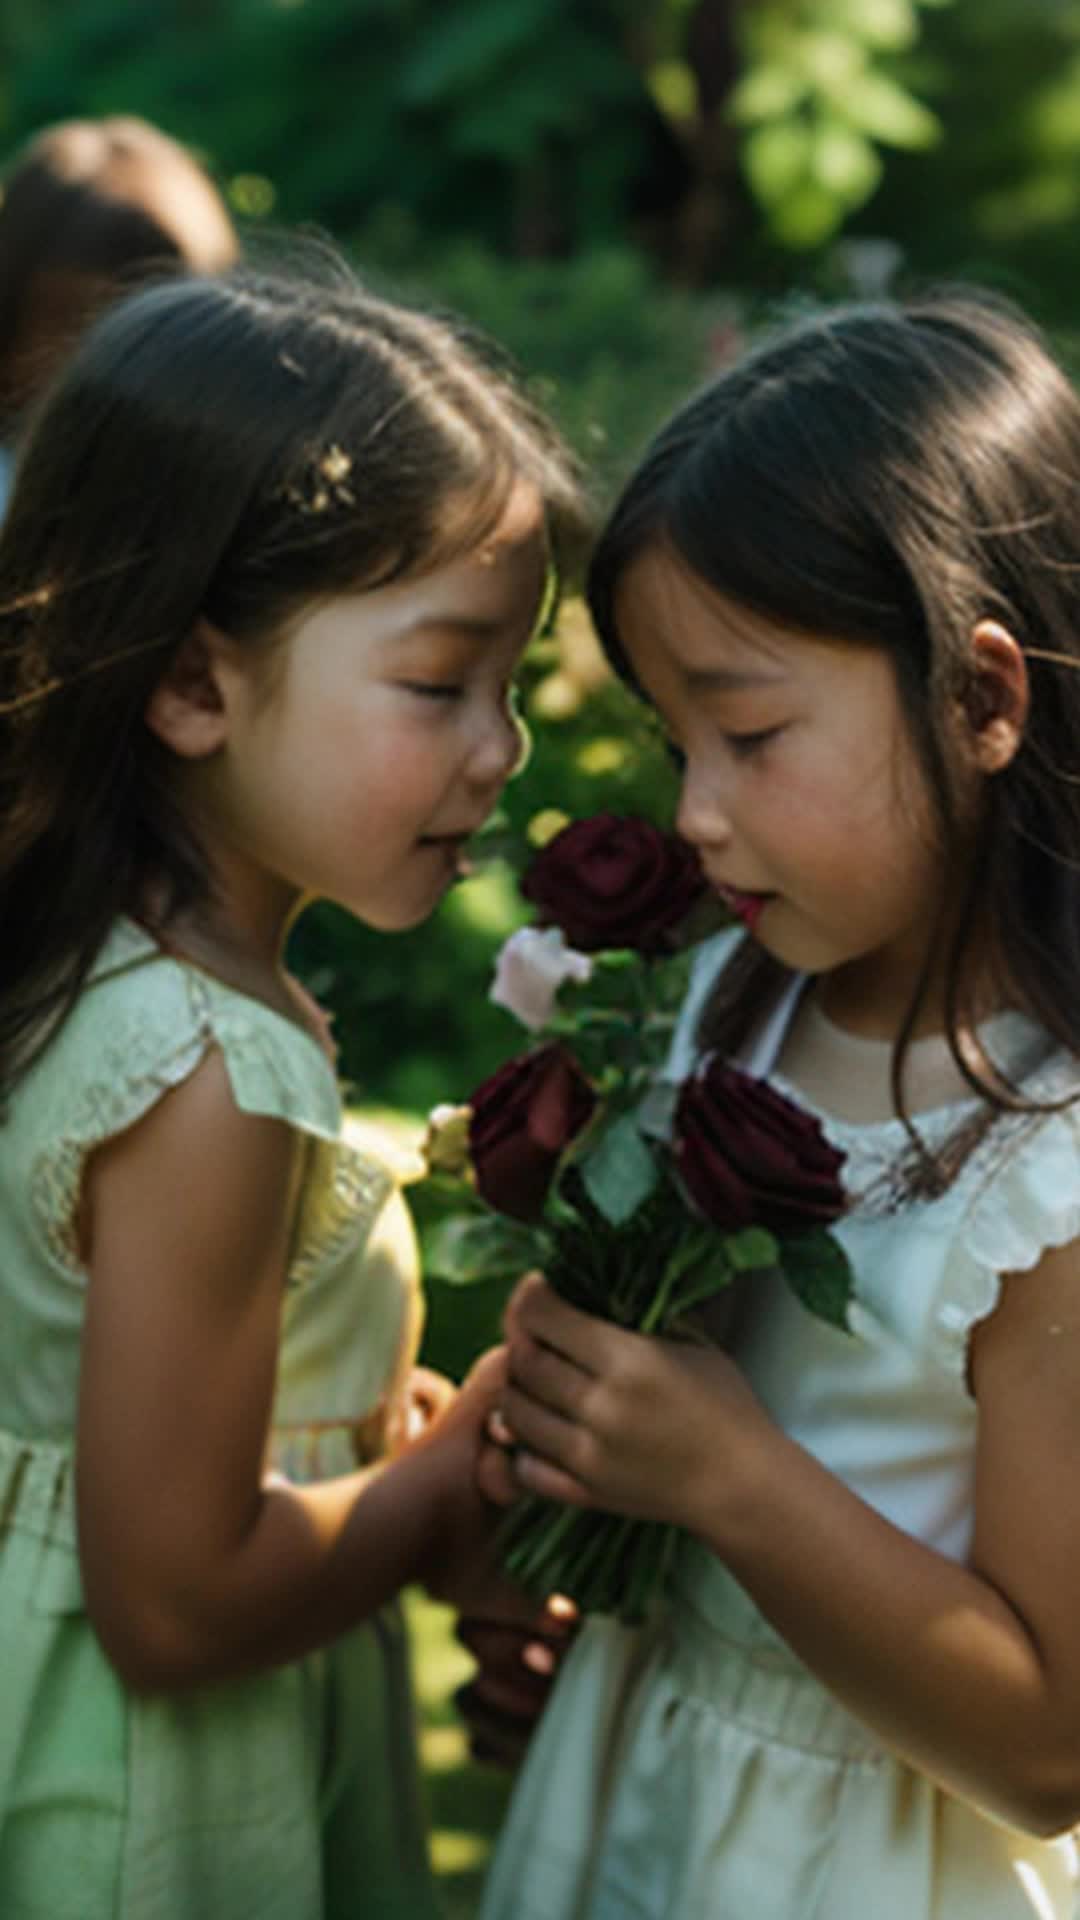 Children eagerly sniffing air in garden, capturing scents of mint, roses, little baskets filled with vibrant nature's bouquet, excited expressions, soft shadows, high resolution